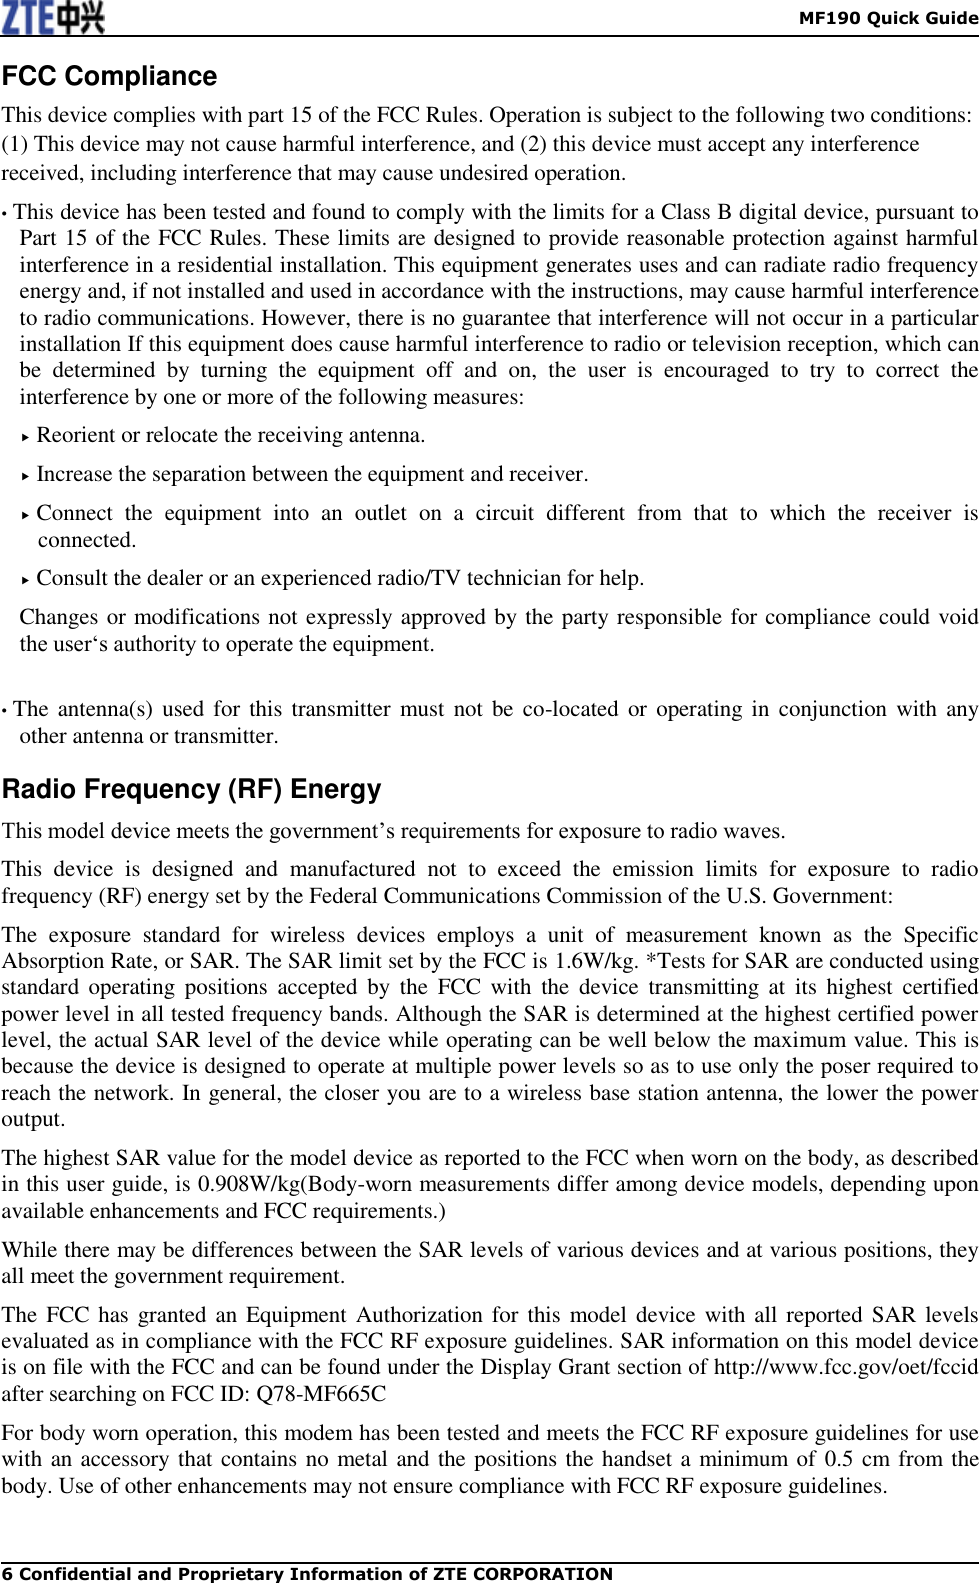    MF190 Quick Guide 6 Confidential and Proprietary Information of ZTE CORPORATION FCC Compliance This device complies with part 15 of the FCC Rules. Operation is subject to the following two conditions: (1) This device may not cause harmful interference, and (2) this device must accept any interference received, including interference that may cause undesired operation. • This device has been tested and found to comply with the limits for a Class B digital device, pursuant to Part 15 of the FCC Rules. These limits are designed to provide reasonable protection against harmful interference in a residential installation. This equipment generates uses and can radiate radio frequency energy and, if not installed and used in accordance with the instructions, may cause harmful interference to radio communications. However, there is no guarantee that interference will not occur in a particular installation If this equipment does cause harmful interference to radio or television reception, which can be  determined  by  turning  the  equipment  off  and  on,  the  user  is  encouraged  to  try  to  correct  the interference by one or more of the following measures:  Reorient or relocate the receiving antenna.  Increase the separation between the equipment and receiver.  Connect  the  equipment  into  an  outlet  on  a  circuit  different  from  that  to  which  the  receiver  is connected.  Consult the dealer or an experienced radio/TV technician for help. Changes or modifications not expressly approved by the party responsible for compliance could void the user‘s authority to operate the equipment.  • The antenna(s)  used for this  transmitter must  not be co-located or  operating in conjunction with  any other antenna or transmitter. Radio Frequency (RF) Energy This model device meets the government’s requirements for exposure to radio waves. This  device  is  designed  and  manufactured  not  to  exceed  the  emission  limits  for  exposure  to  radio frequency (RF) energy set by the Federal Communications Commission of the U.S. Government: The  exposure  standard  for  wireless  devices  employs  a  unit  of  measurement  known  as  the  Specific Absorption Rate, or SAR. The SAR limit set by the FCC is 1.6W/kg. *Tests for SAR are conducted using standard  operating  positions  accepted  by  the  FCC  with  the  device  transmitting  at  its  highest  certified power level in all tested frequency bands. Although the SAR is determined at the highest certified power level, the actual SAR level of the device while operating can be well below the maximum value. This is because the device is designed to operate at multiple power levels so as to use only the poser required to reach the network. In general, the closer you are to a wireless base station antenna, the lower the power output. The highest SAR value for the model device as reported to the FCC when worn on the body, as described in this user guide, is 0.908W/kg(Body-worn measurements differ among device models, depending upon available enhancements and FCC requirements.) While there may be differences between the SAR levels of various devices and at various positions, they all meet the government requirement. The FCC has  granted an Equipment Authorization for this  model device with all reported SAR levels evaluated as in compliance with the FCC RF exposure guidelines. SAR information on this model device is on file with the FCC and can be found under the Display Grant section of http://www.fcc.gov/oet/fccid after searching on FCC ID: Q78-MF665C For body worn operation, this modem has been tested and meets the FCC RF exposure guidelines for use with an accessory that contains no metal and the positions the handset a minimum of 0.5 cm from the body. Use of other enhancements may not ensure compliance with FCC RF exposure guidelines.  